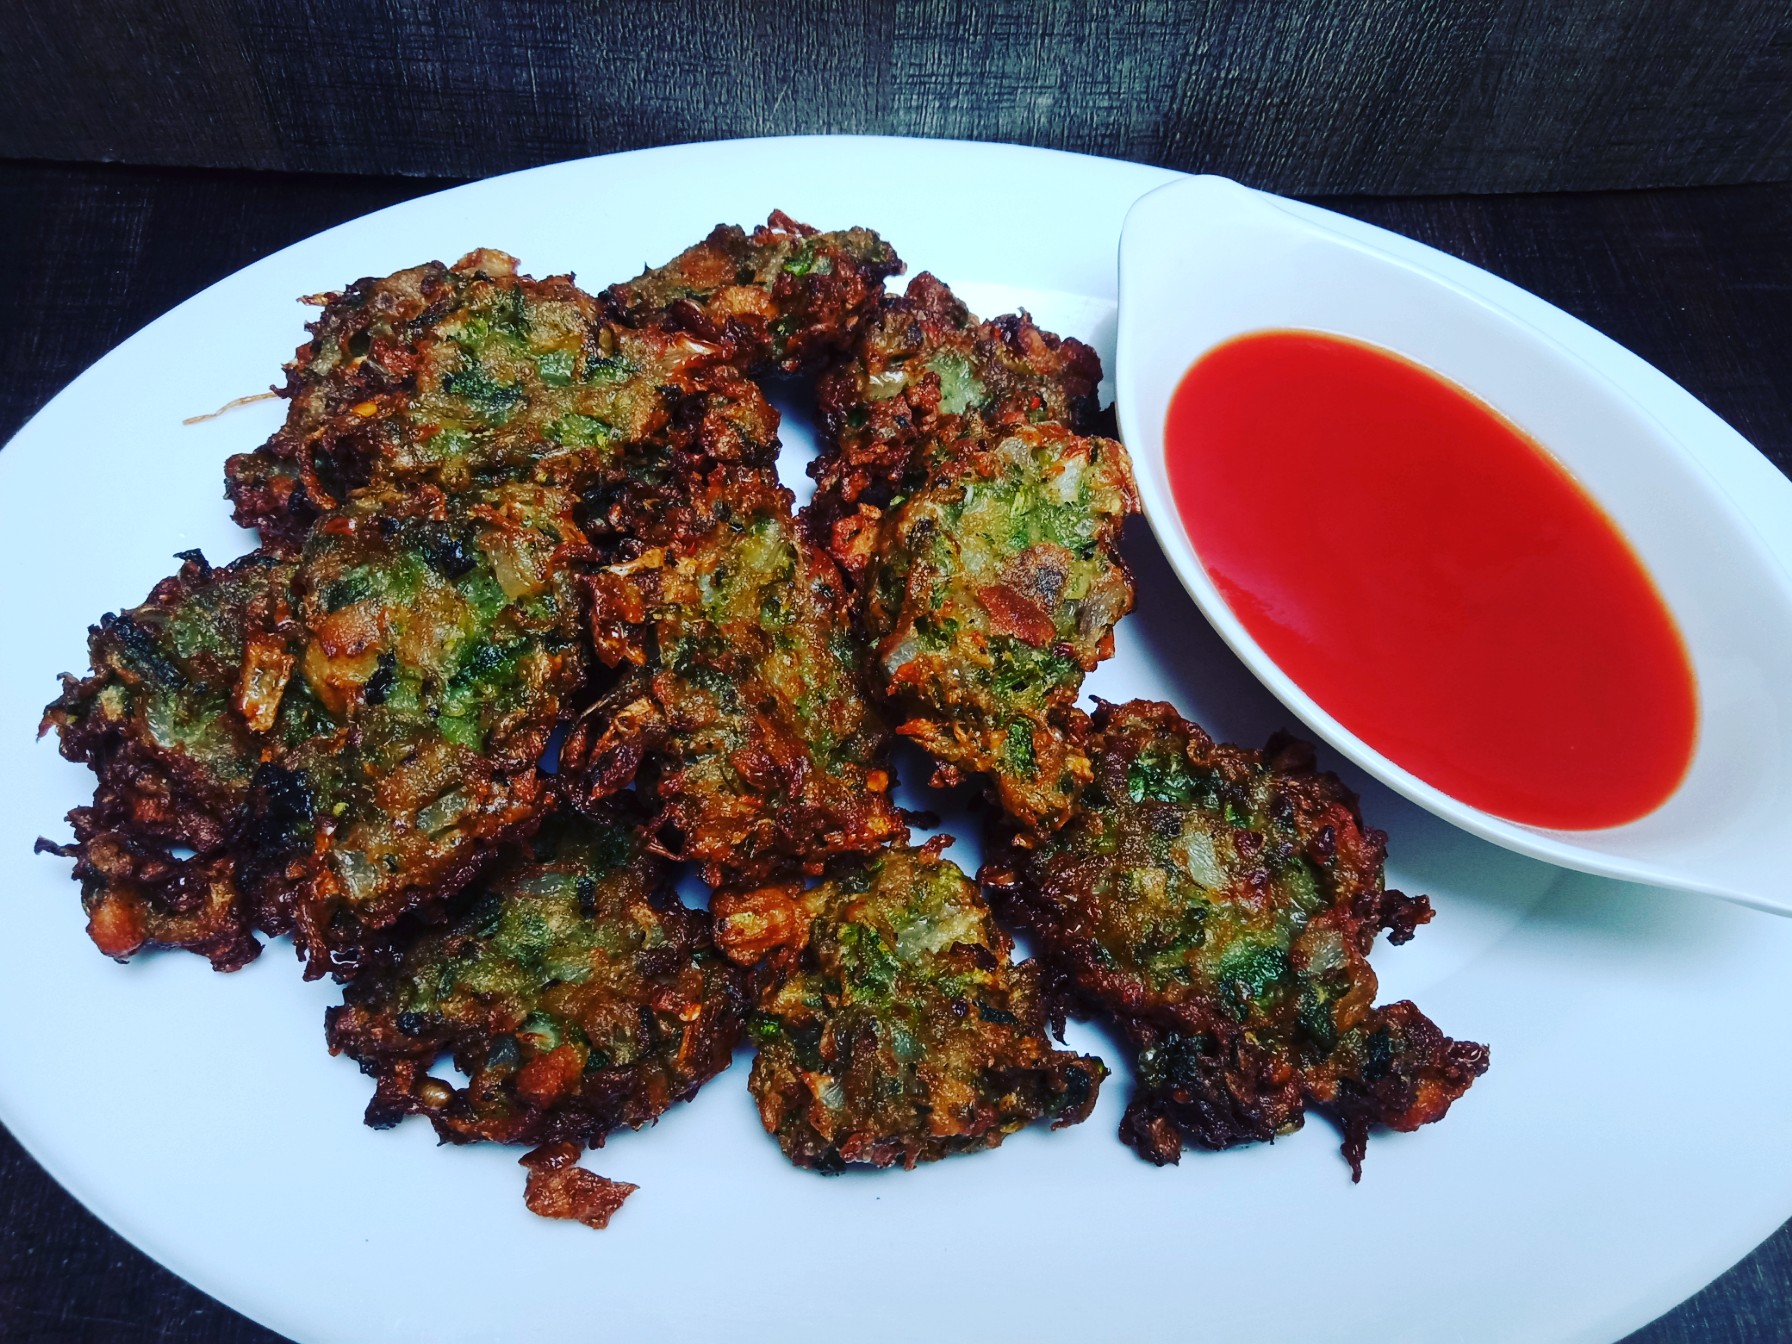 Courgette Fritters Recipe